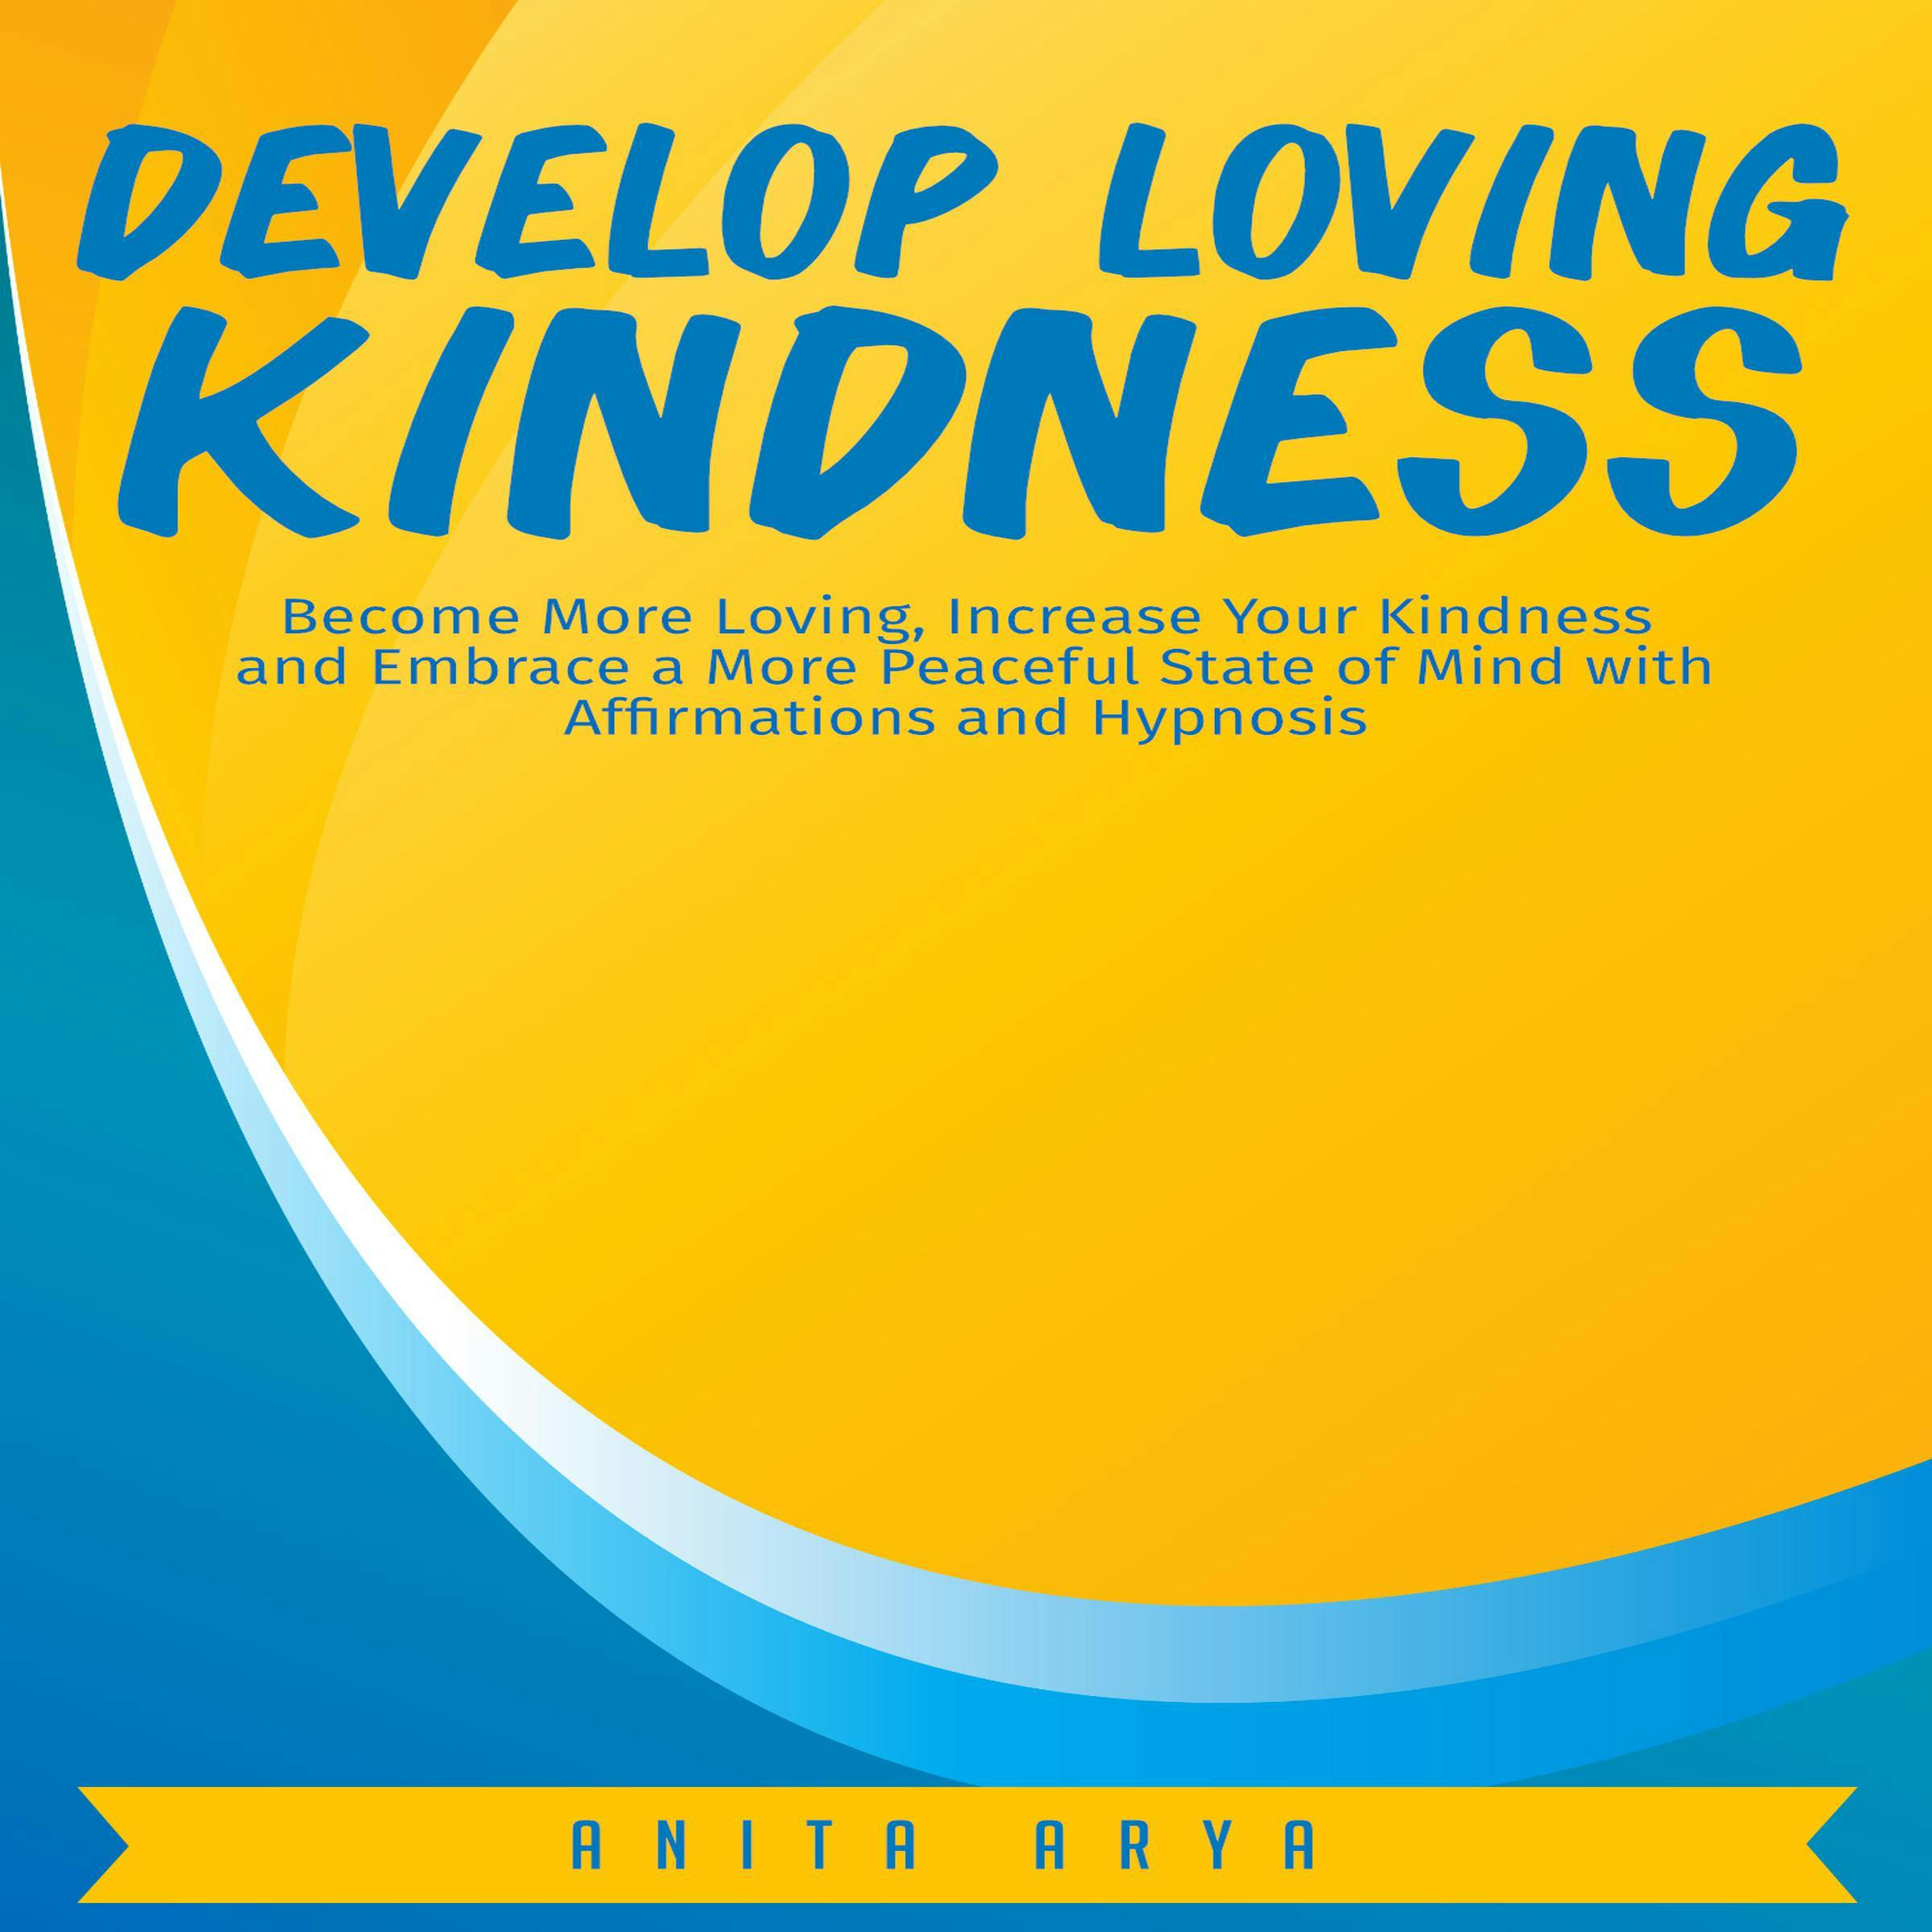 Develop Loving Kindness: Become More Loving, Increase Your Kindness and Embrace a More Peaceful State of Mind with Affirmations and Hypnosis - Anita Arya